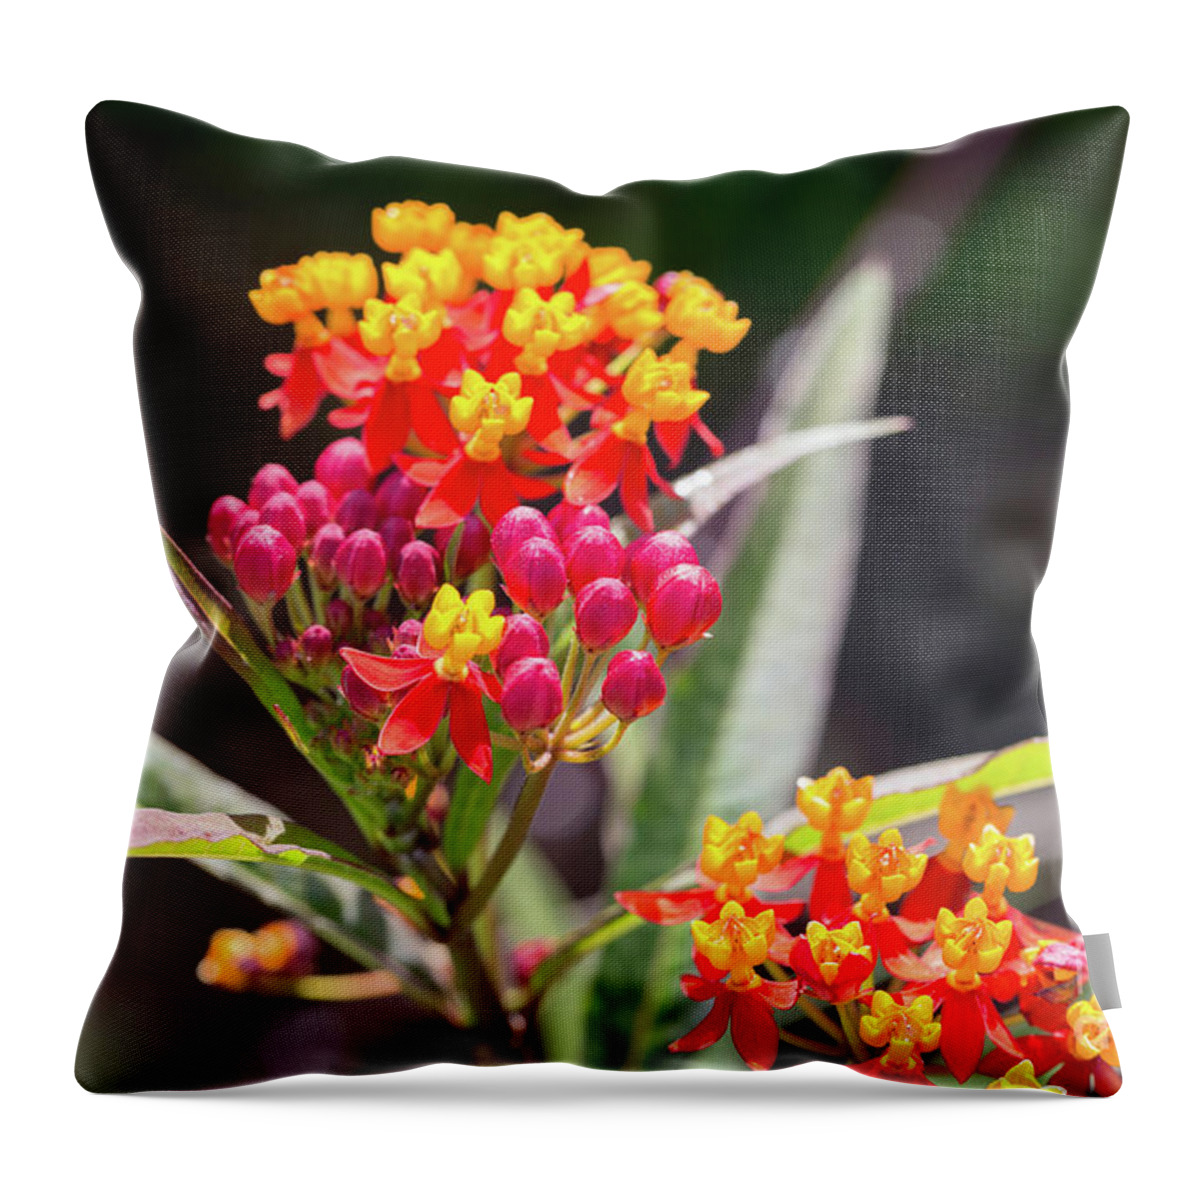 Asclepias Curassavica Silky Deep Red Throw Pillow featuring the photograph Milkweed Silky Deep Red by Louise Heusinkveld